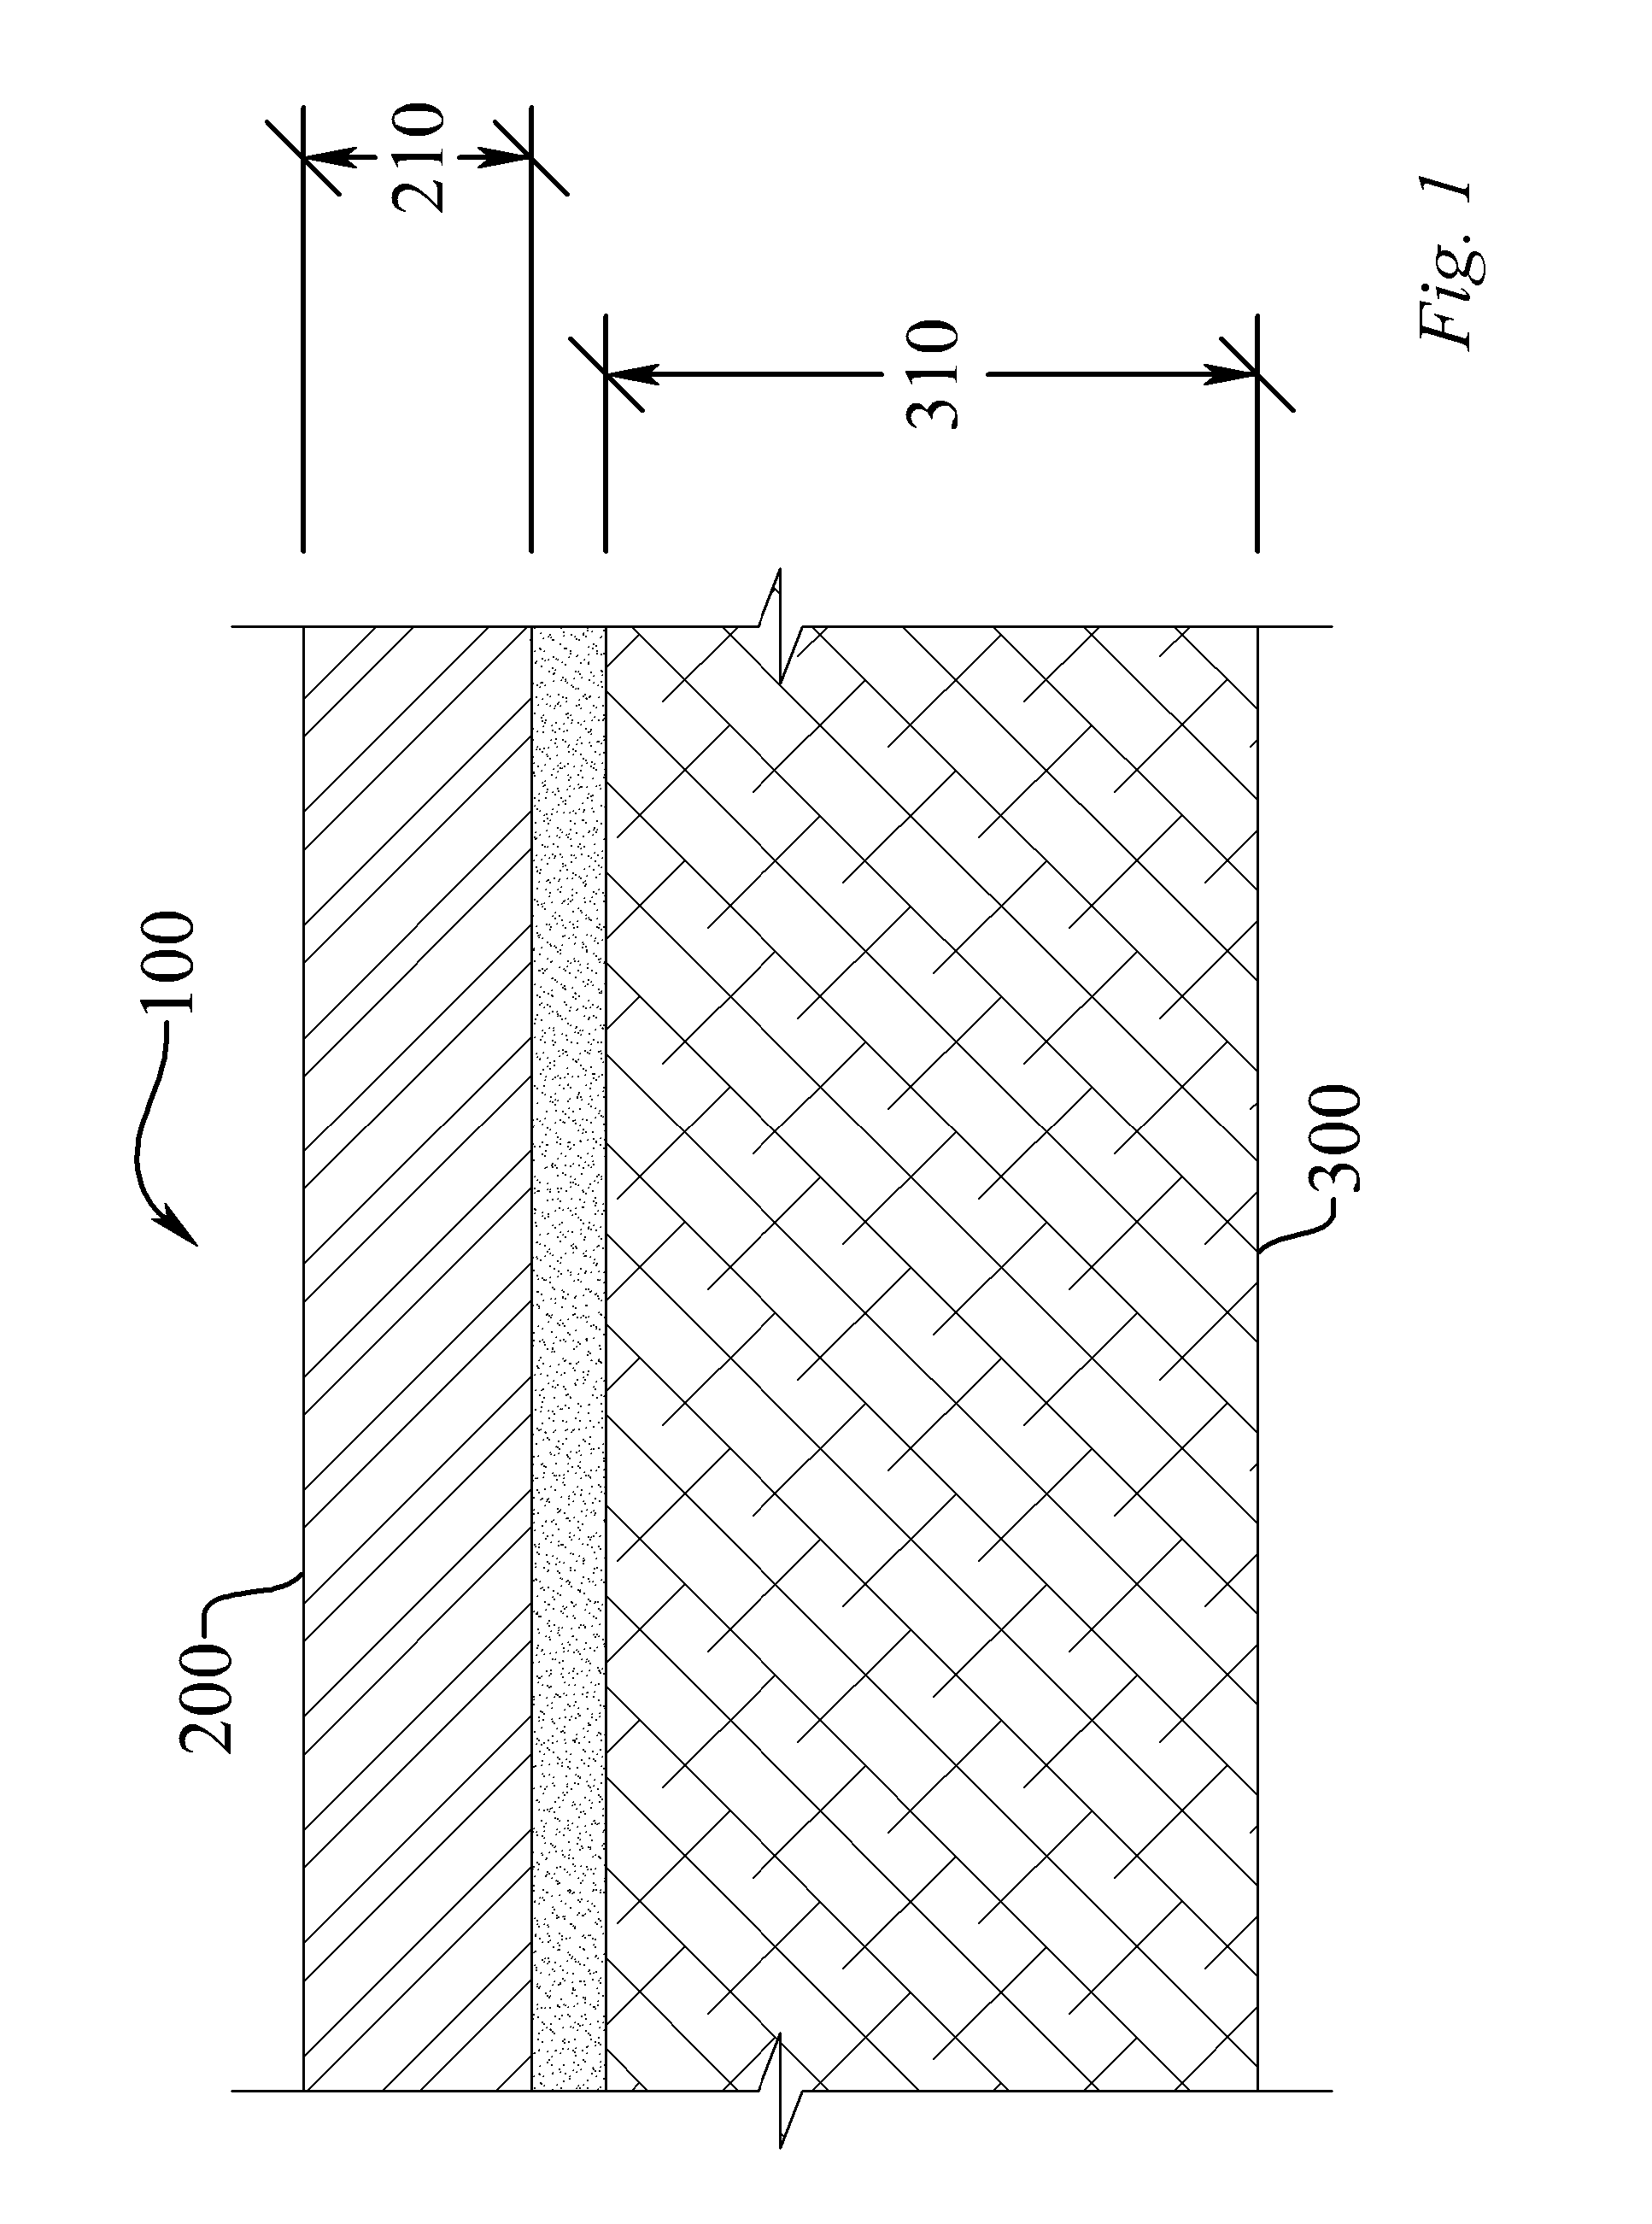 Thermally and acoustically insulative vehicle flooring